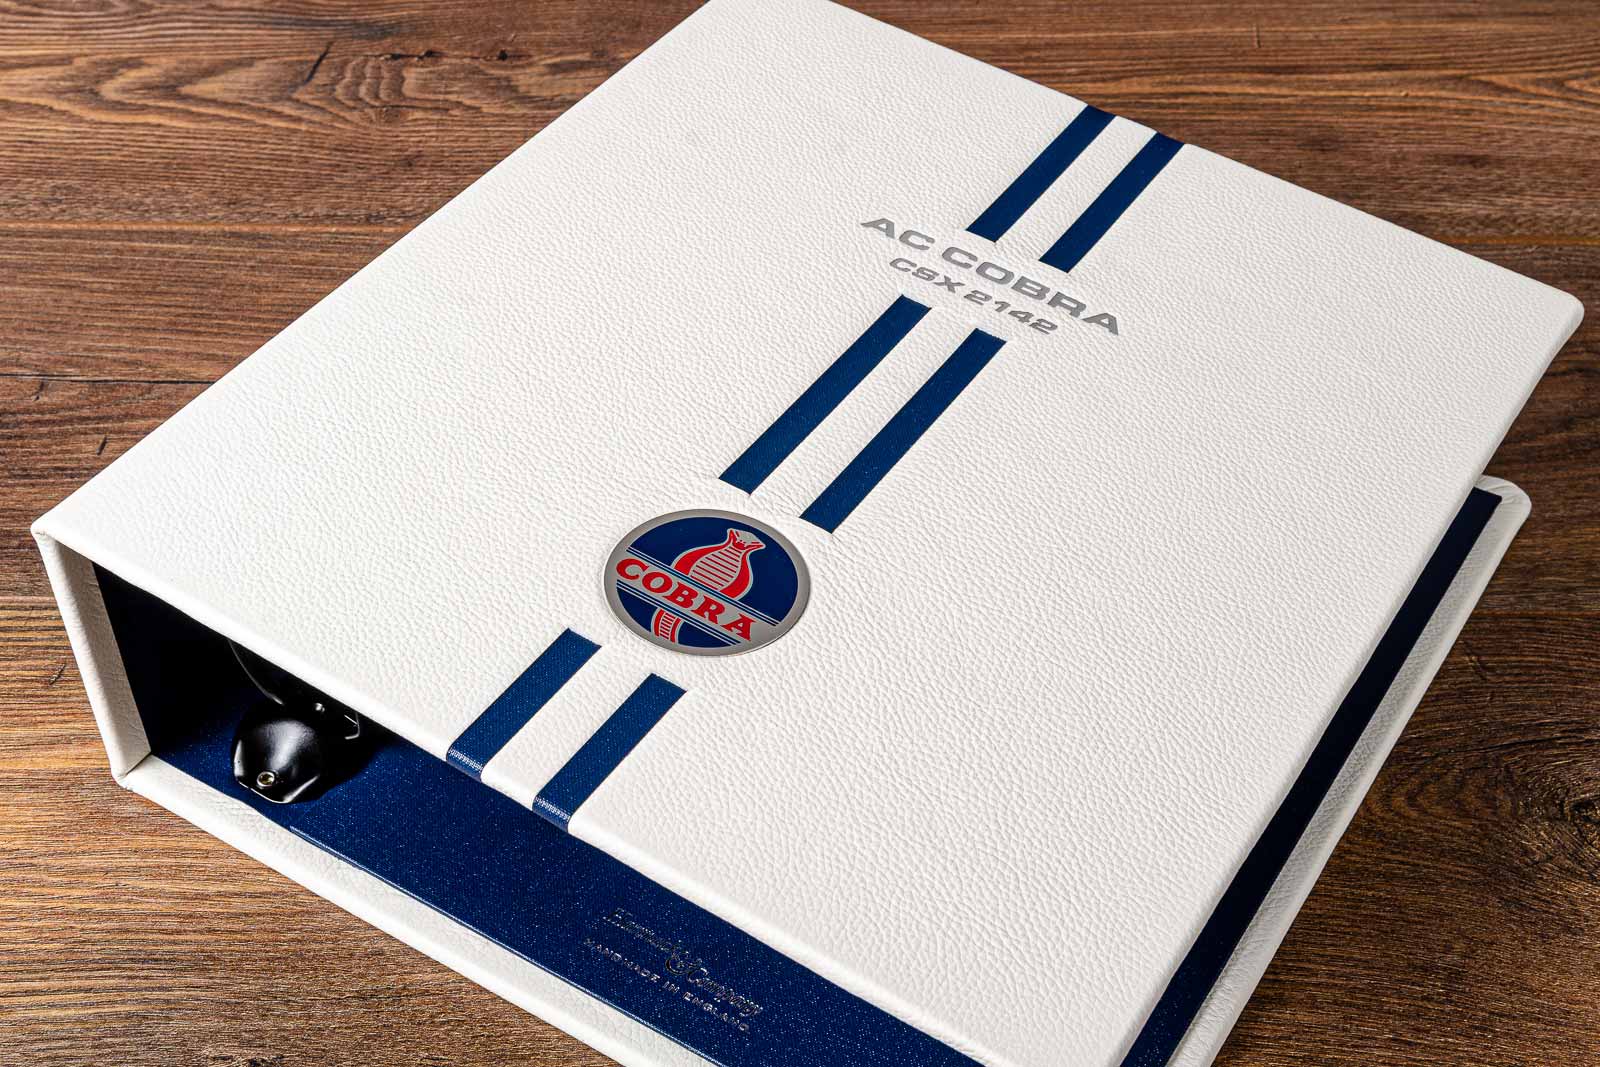 Personalised luxury leather ring binder for documents for historic cobra racing car